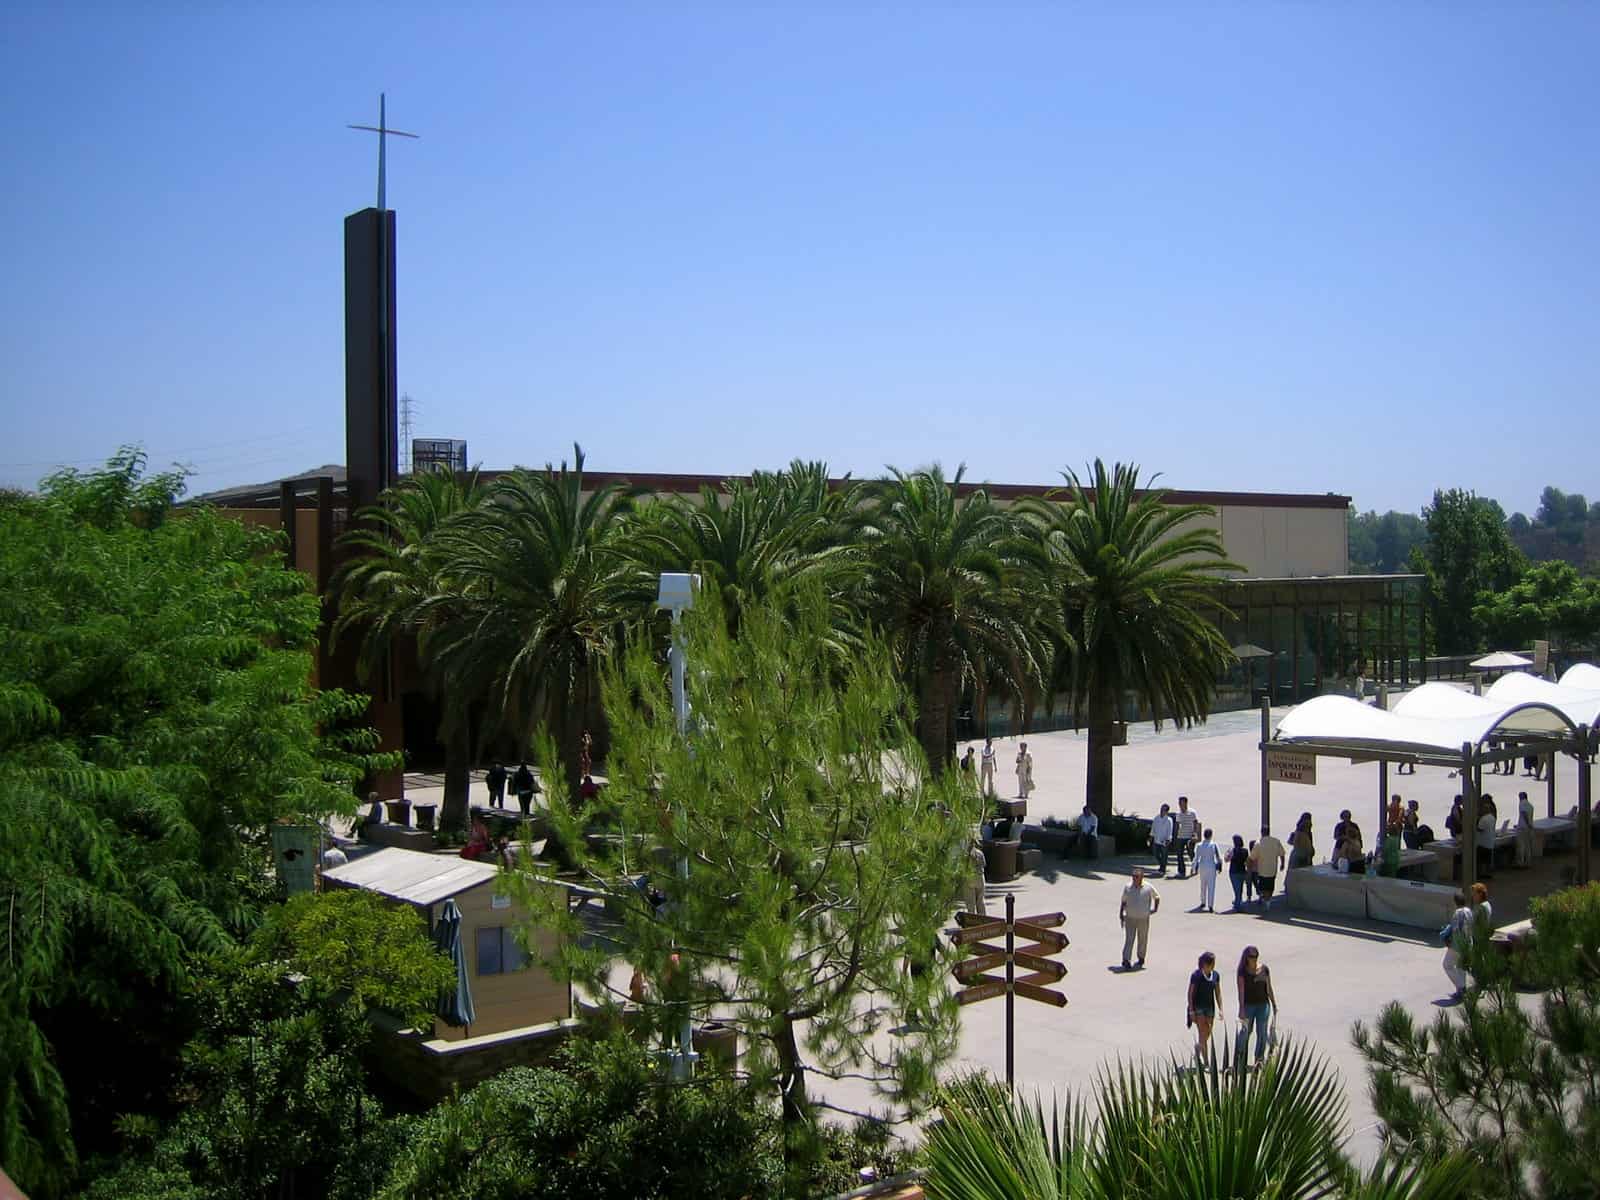 Saddleback church building as seen from outside.